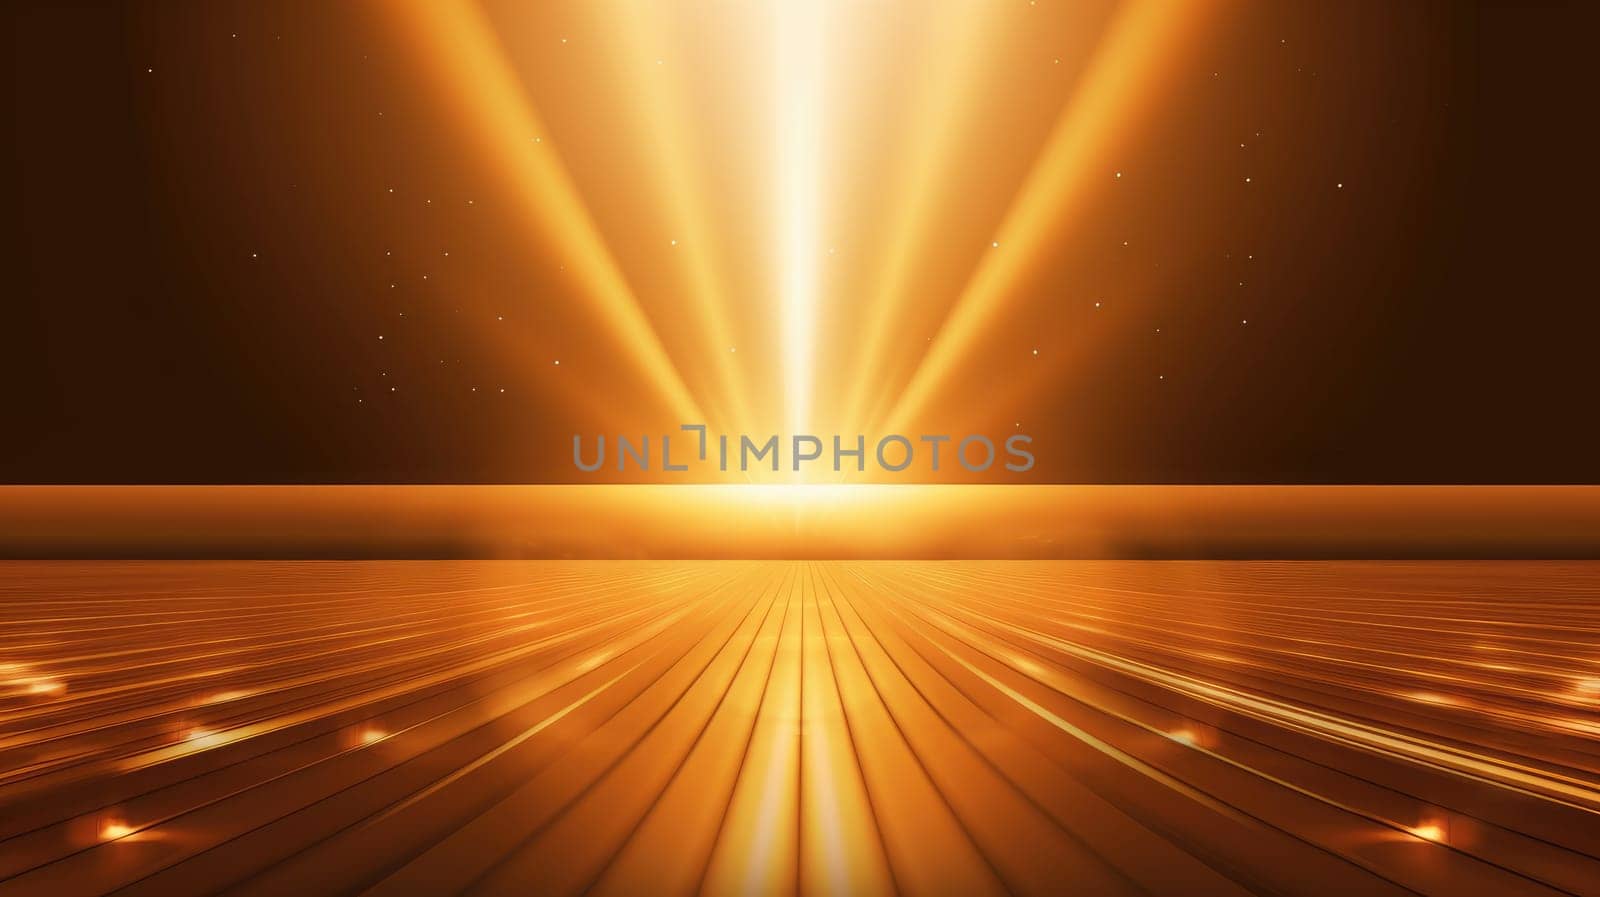 Abstract background with gold color, light elements. Luxury background